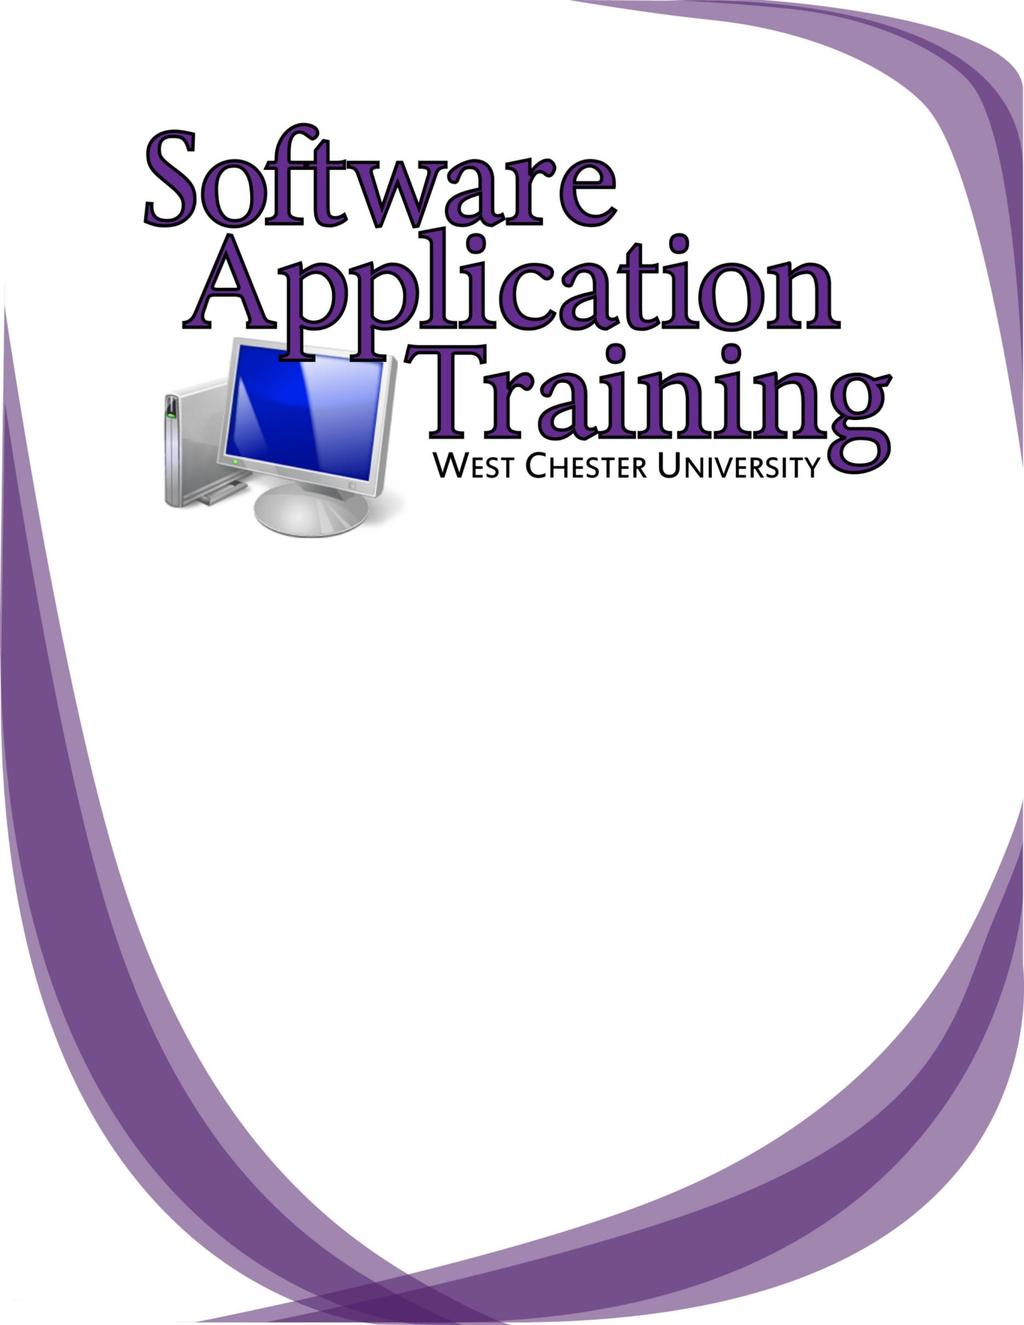 Introduction to Excel 2013 Copyright 2014, Software Application Training, West Chester University.